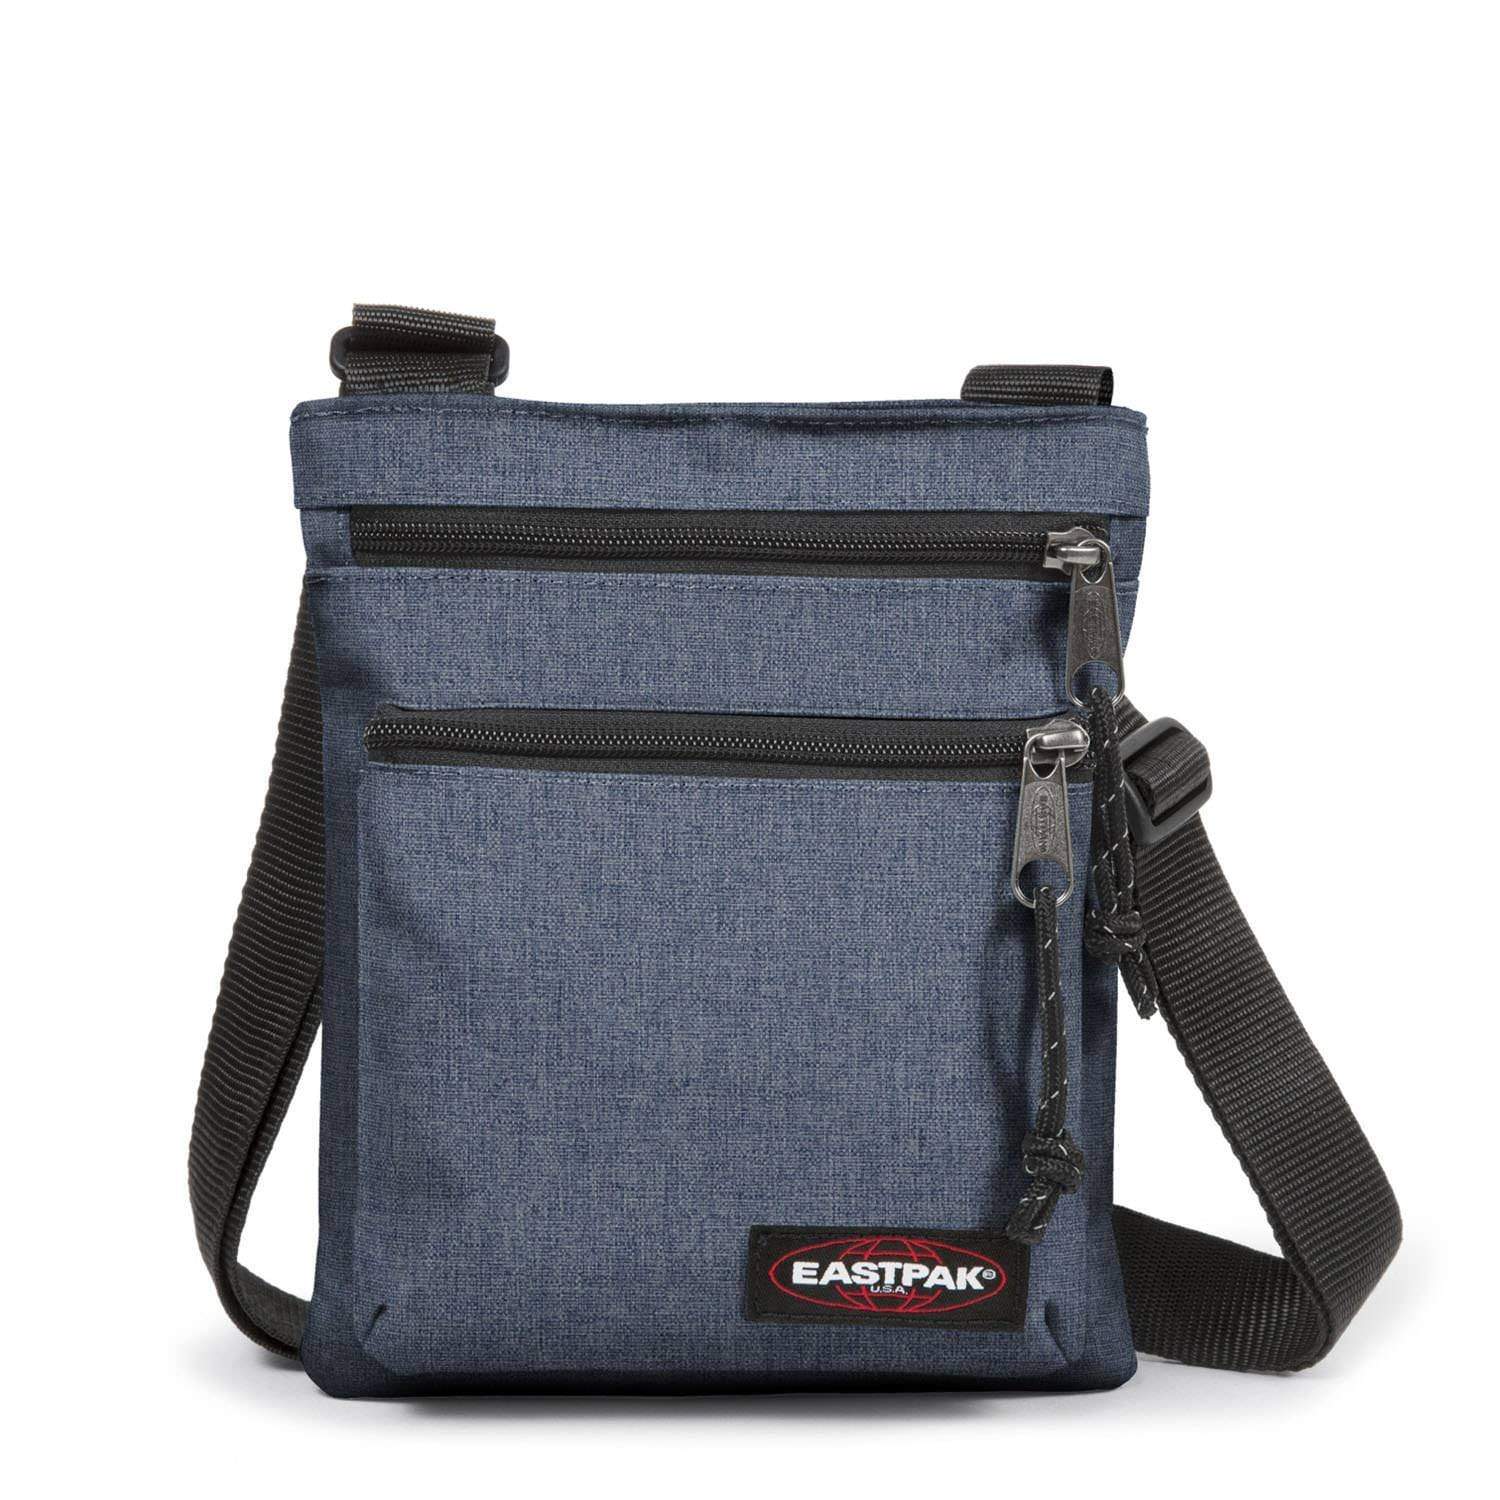 Eastpak Rusher Crafty Jeans